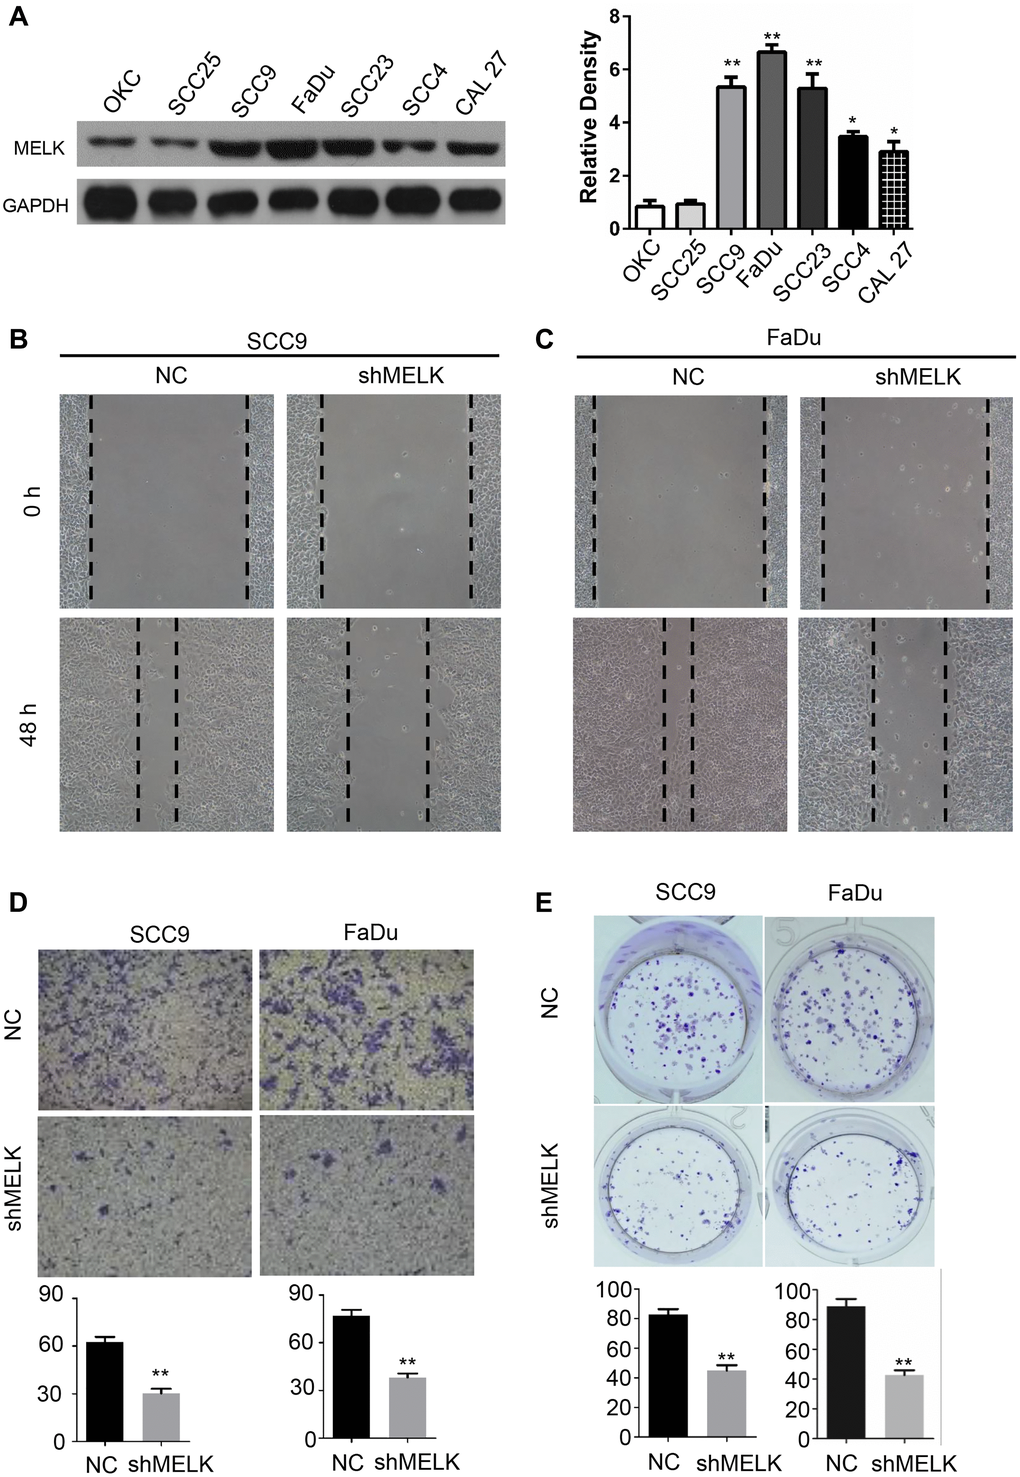 MELK downregulation impedes growth of OSCC cells. (A) Representative western blotting after transfection of shMELK in OKC and OSCC cell lines. Cell mobility of MELK knockdown in SCC9 (B) and FaDu (C) cell lines. (D) Iconic images and quantification of invaded cells. (E) Typical images and quantification of anchor-dependent colony formation. **P 